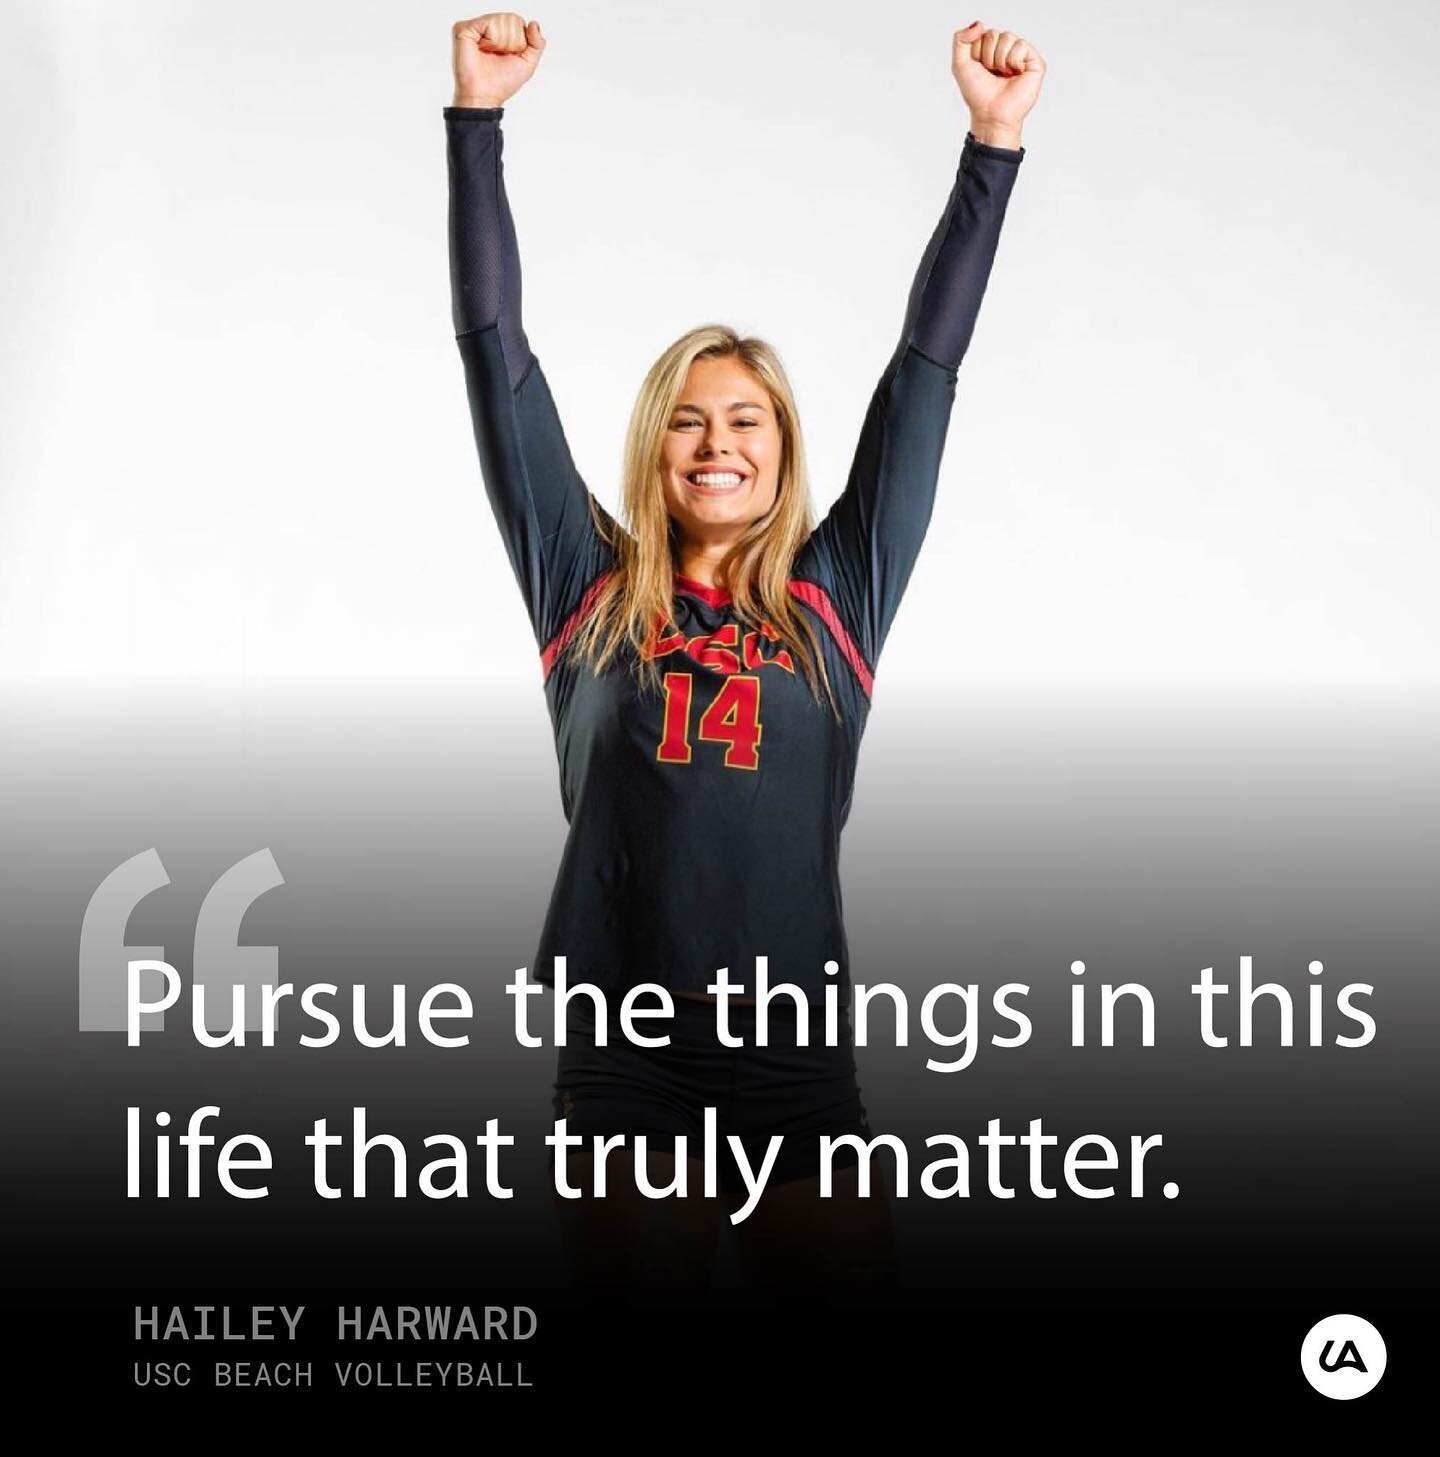 From not playing beach volleyball for over a year, to winning a National Championship at USC, Hailey Harward reflects on what she&rsquo;s learned in her career this far. Only more big things in store for Hailey!